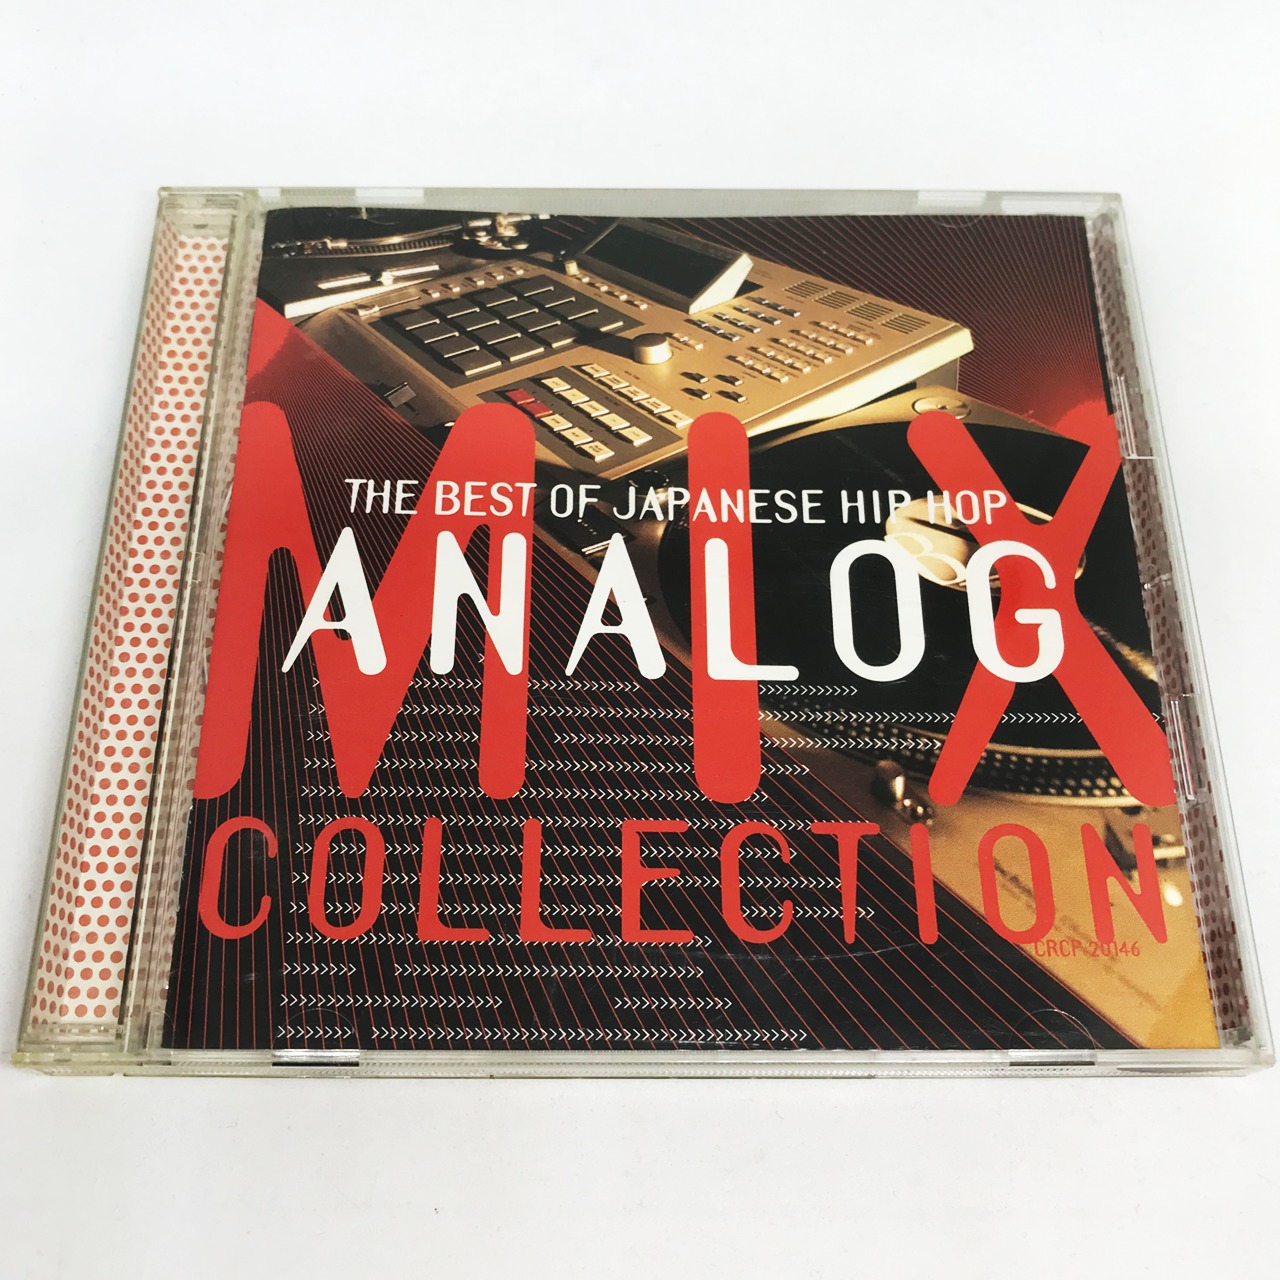 The Japanese Hiphop Analog Mix Collection | 90年代の日本語ラップ